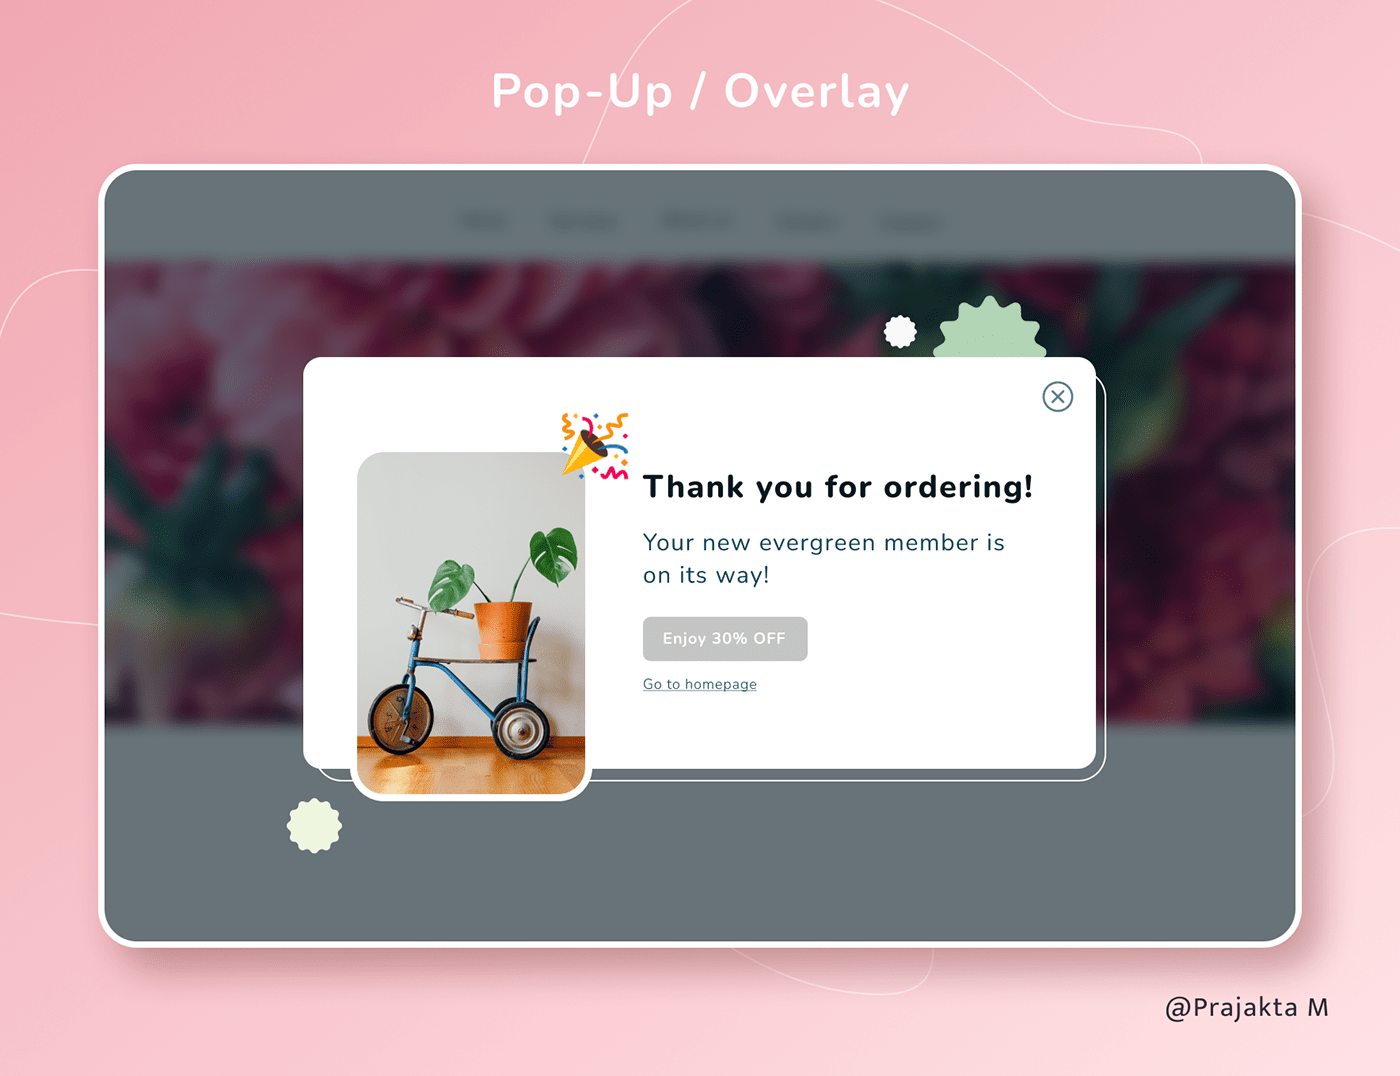 message notification Overlay Popup popupmessage thank you typography   UI ux visual design